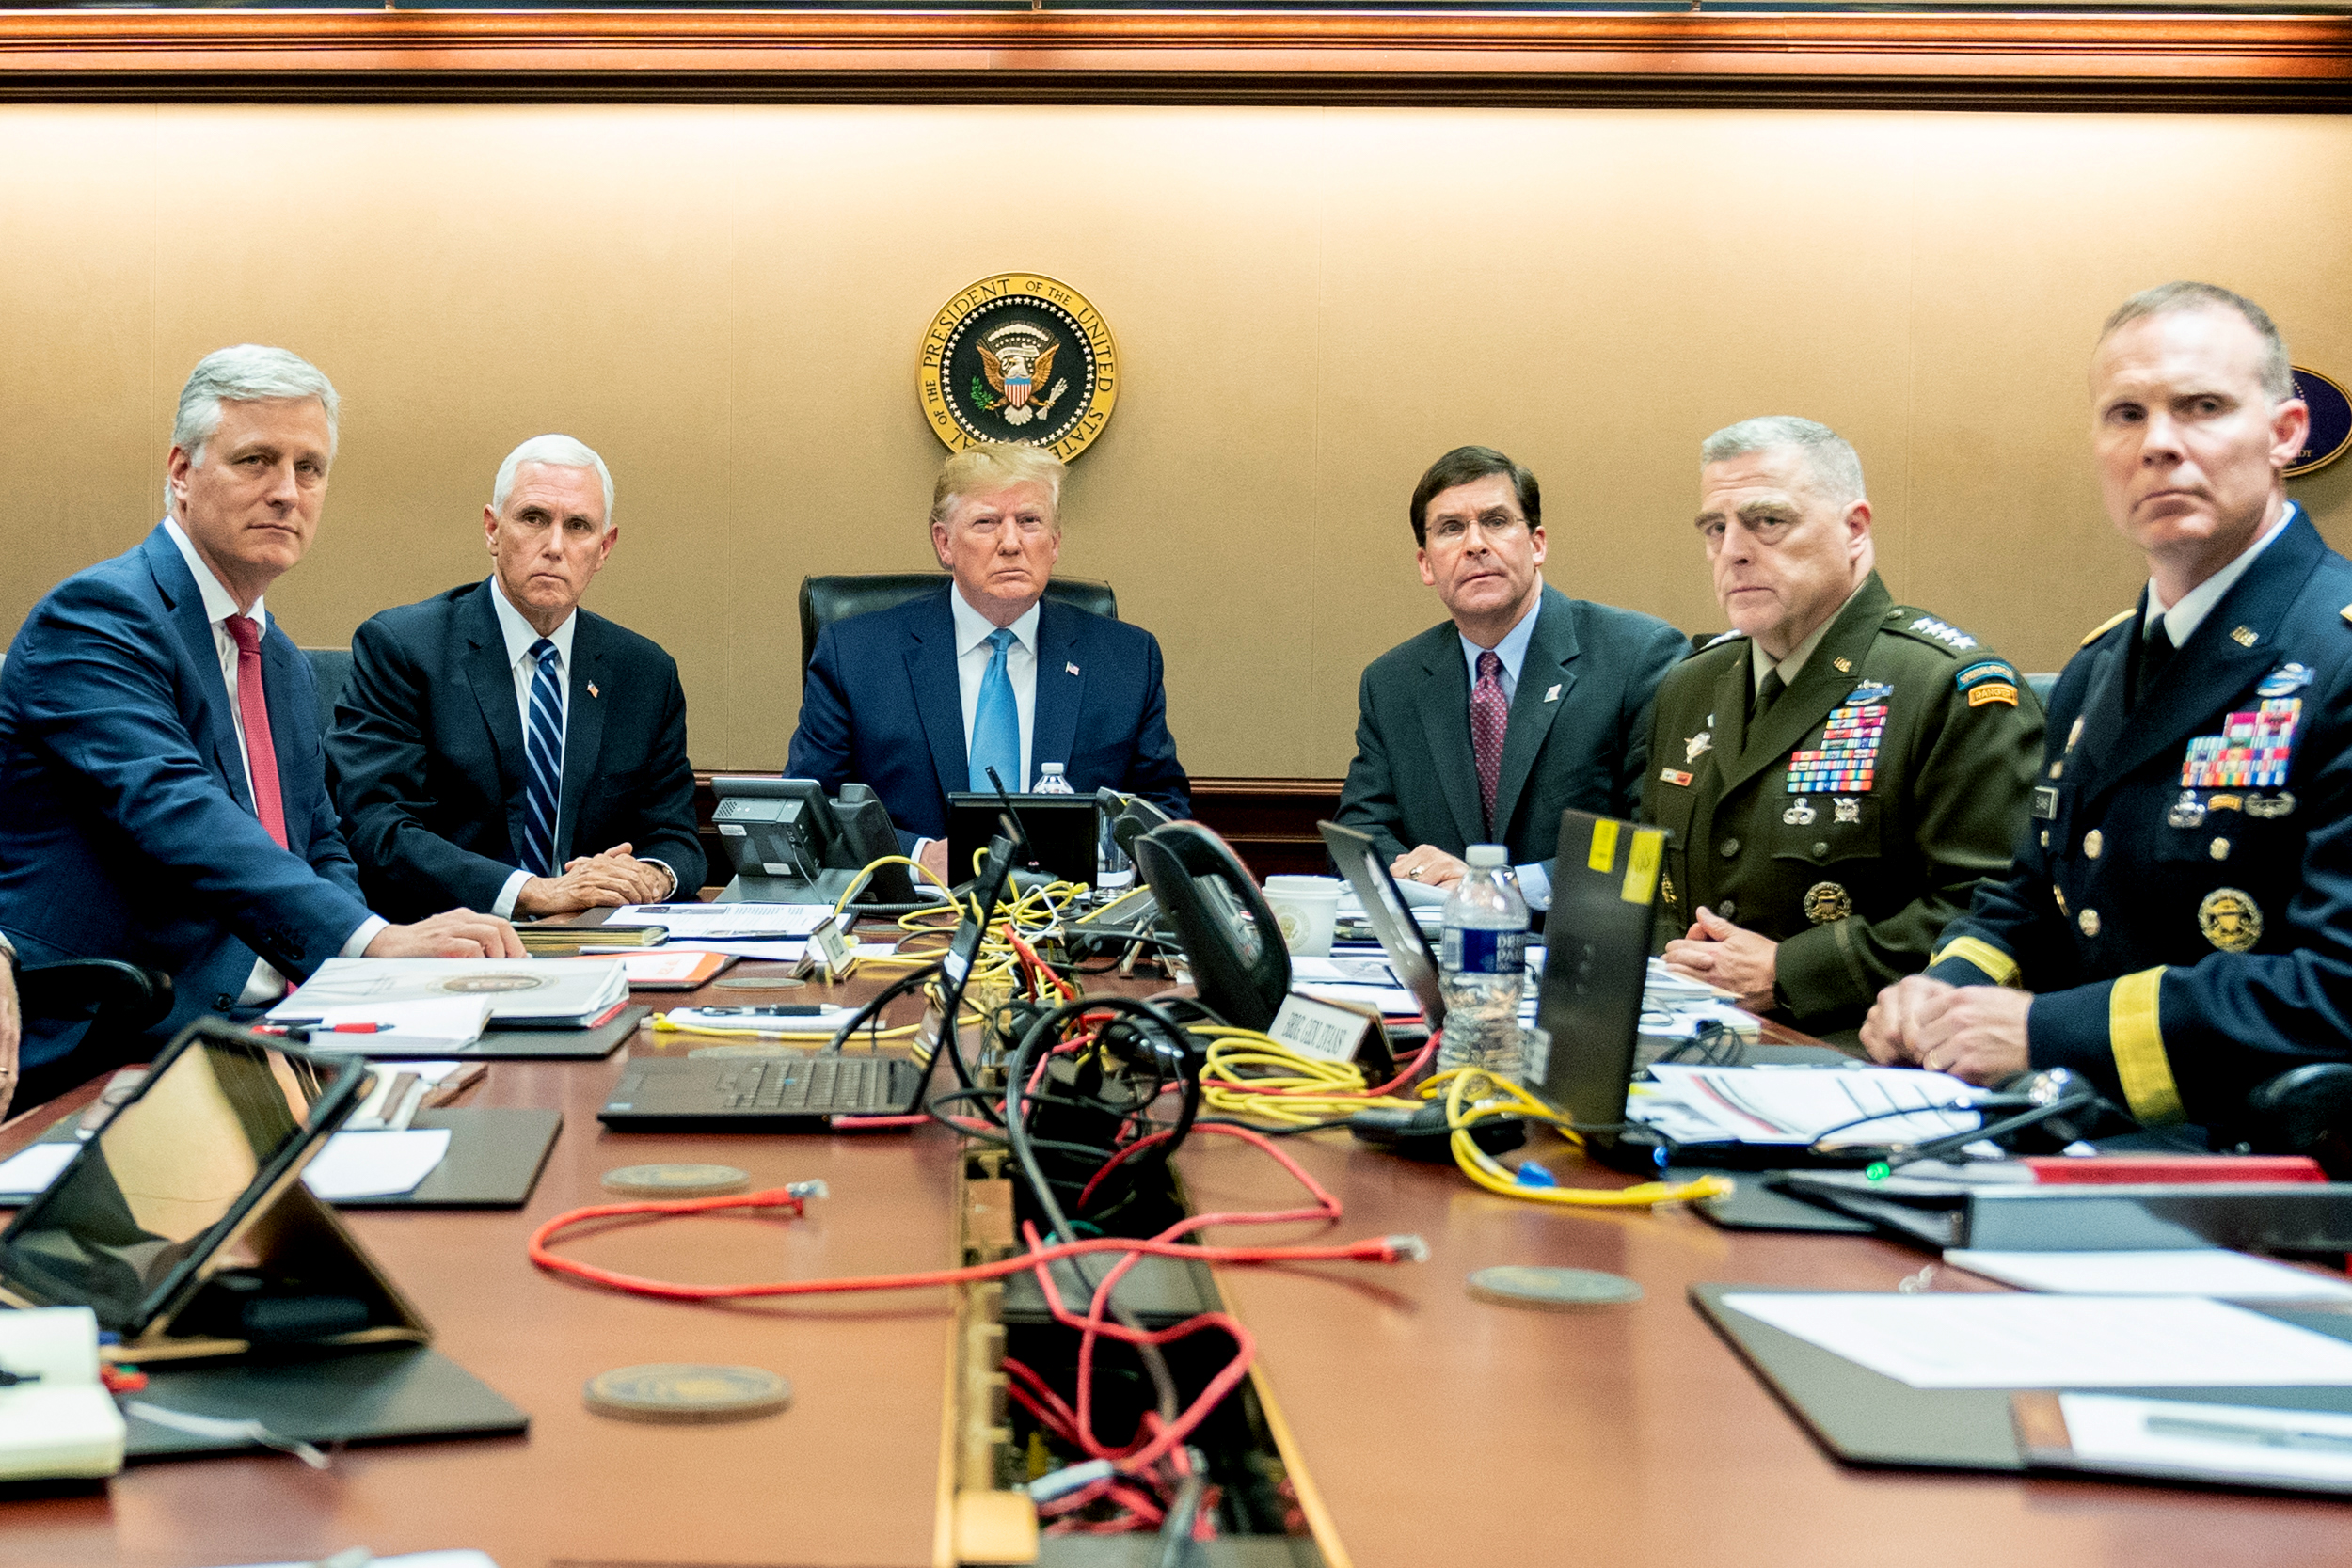 PHOTO: President Donald Trump and government officials monitor developments as special operations forces close in on ISIS leader Abu Bakr al-Baghdadi's compound in Syria in the situation room at the White House, Oct. 26, 2019. 